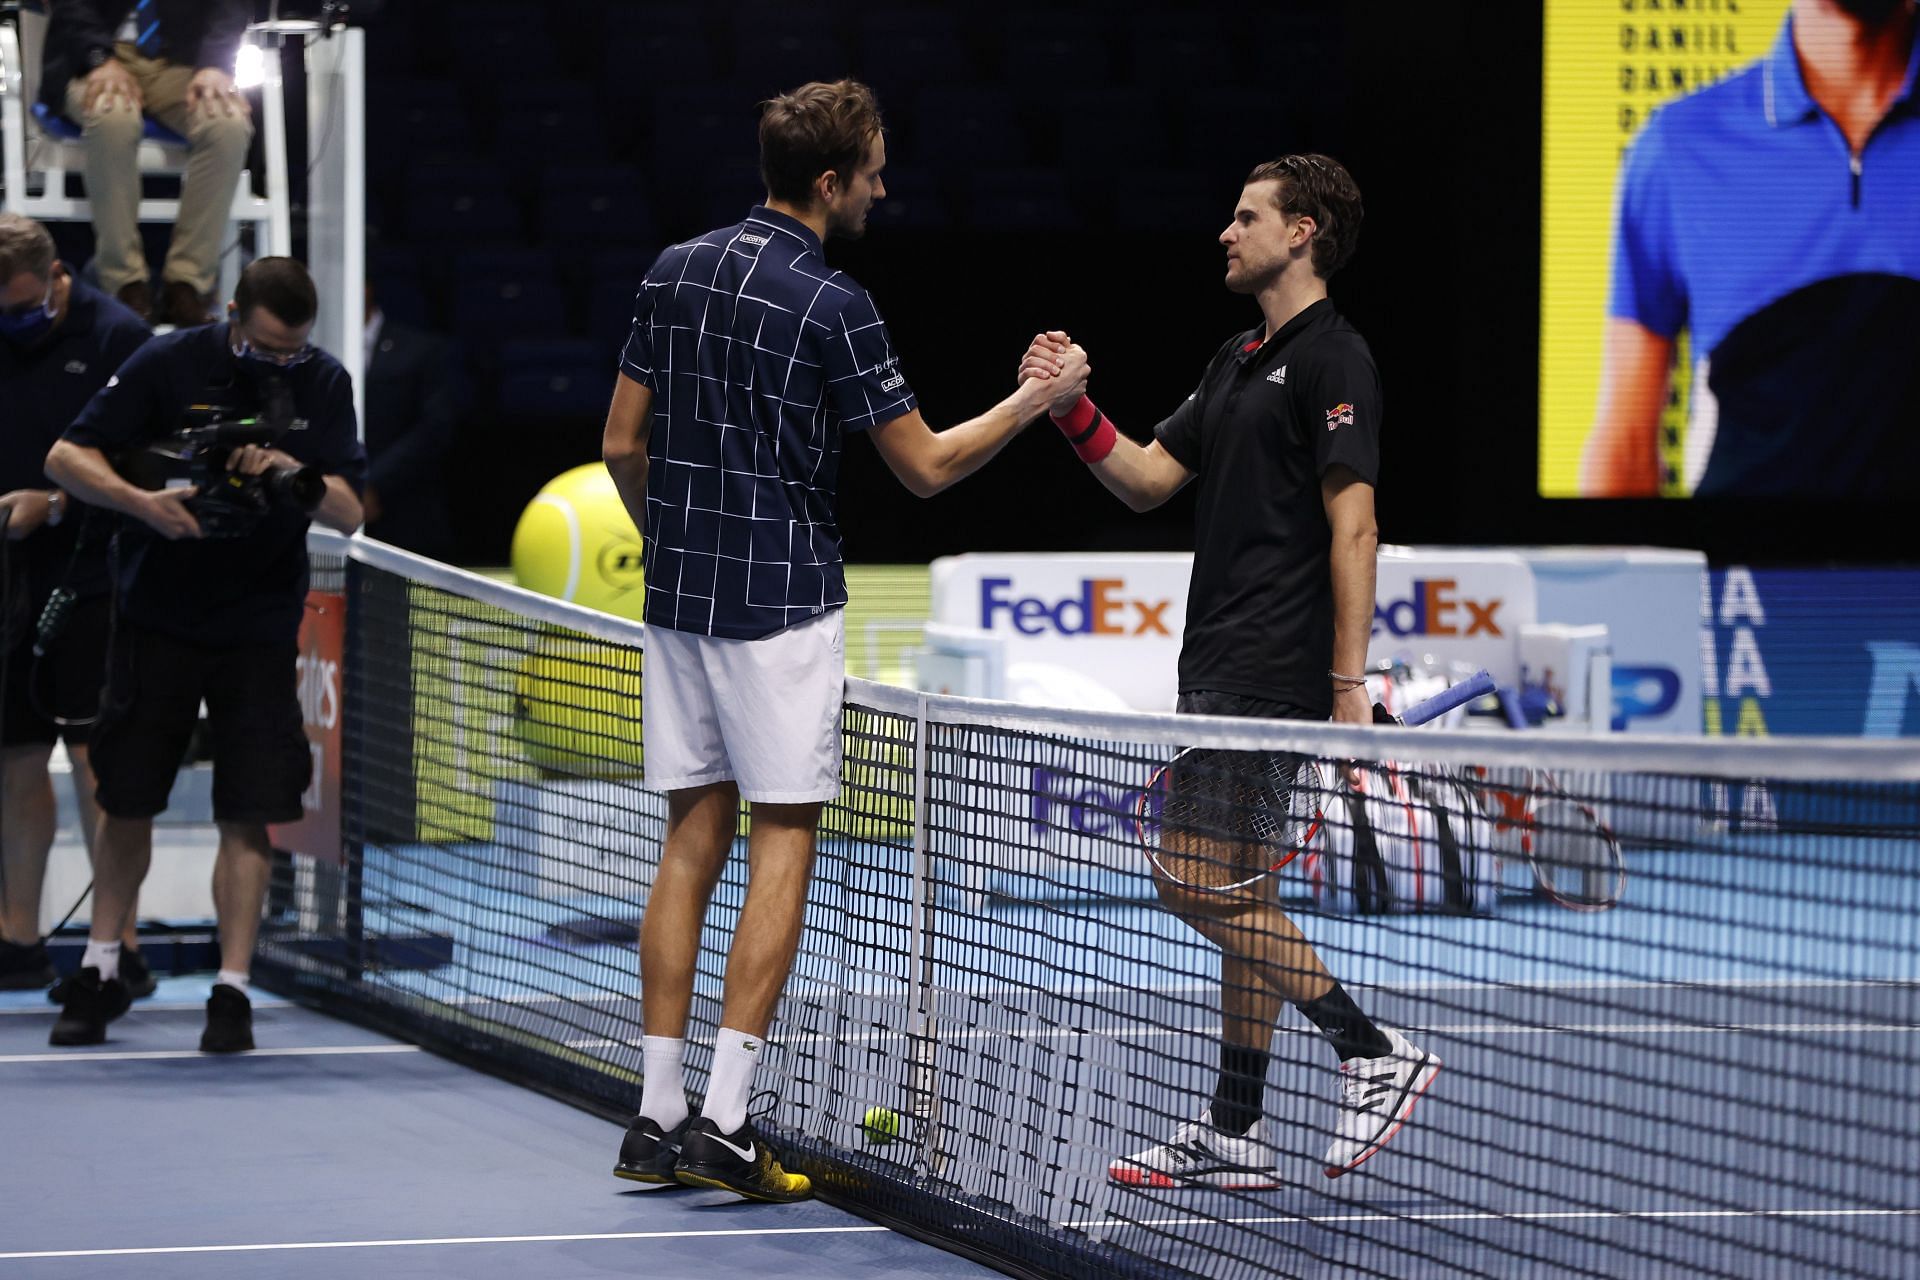 Daniil Medvedev (L) and Dominic Thiem (R) at the 2020 Nitto ATP World Tour Finals